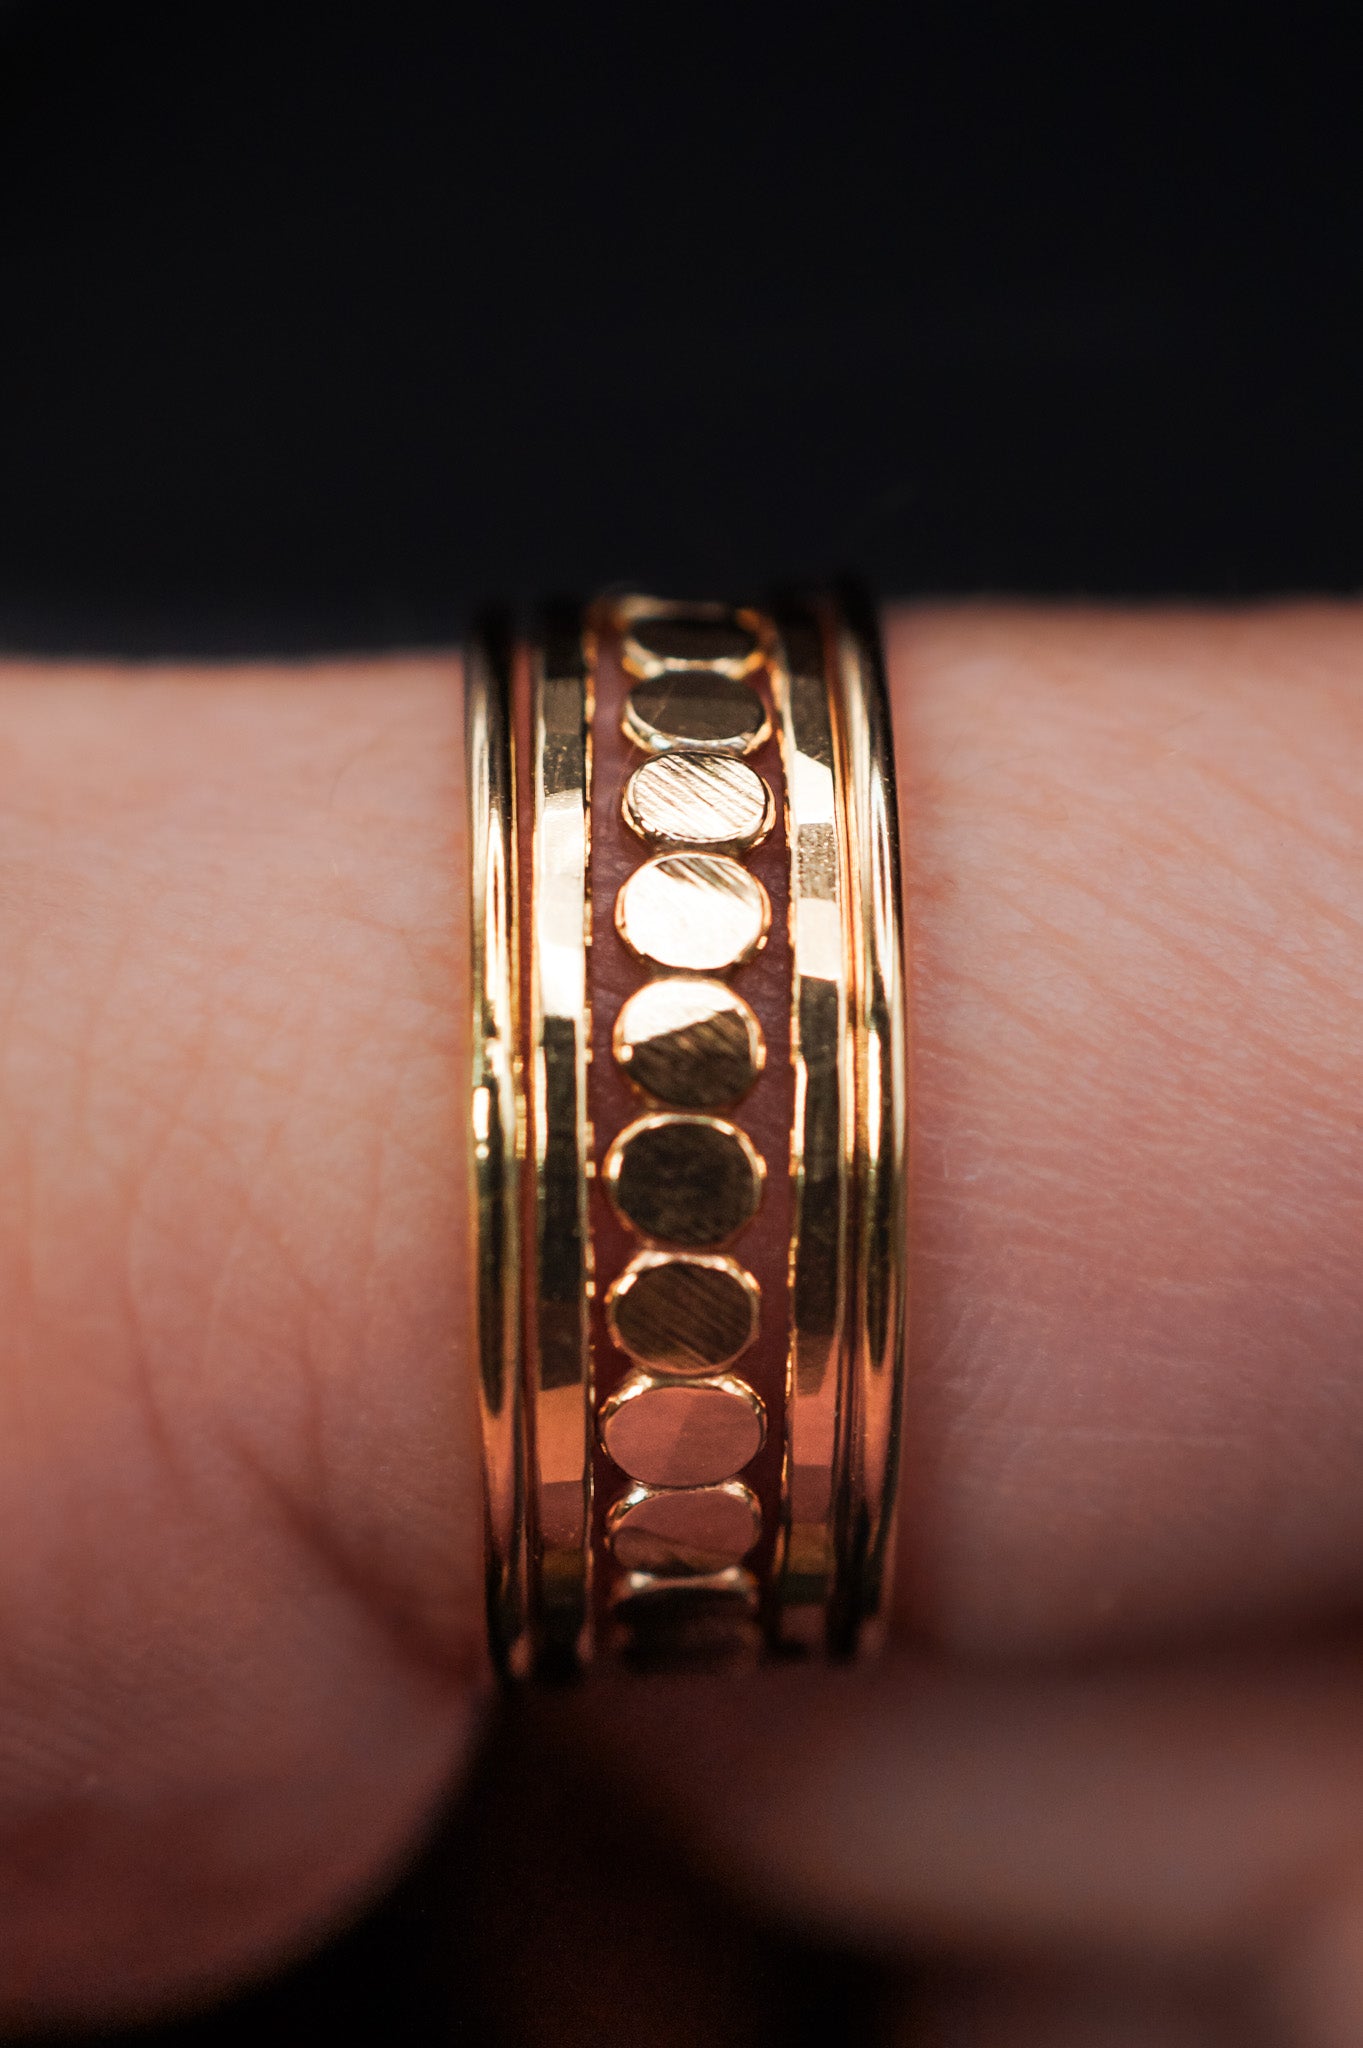 The Classic Bead Set of 5 Stacking Rings, Gold Fill, Rose Gold Fill or Sterling Silver